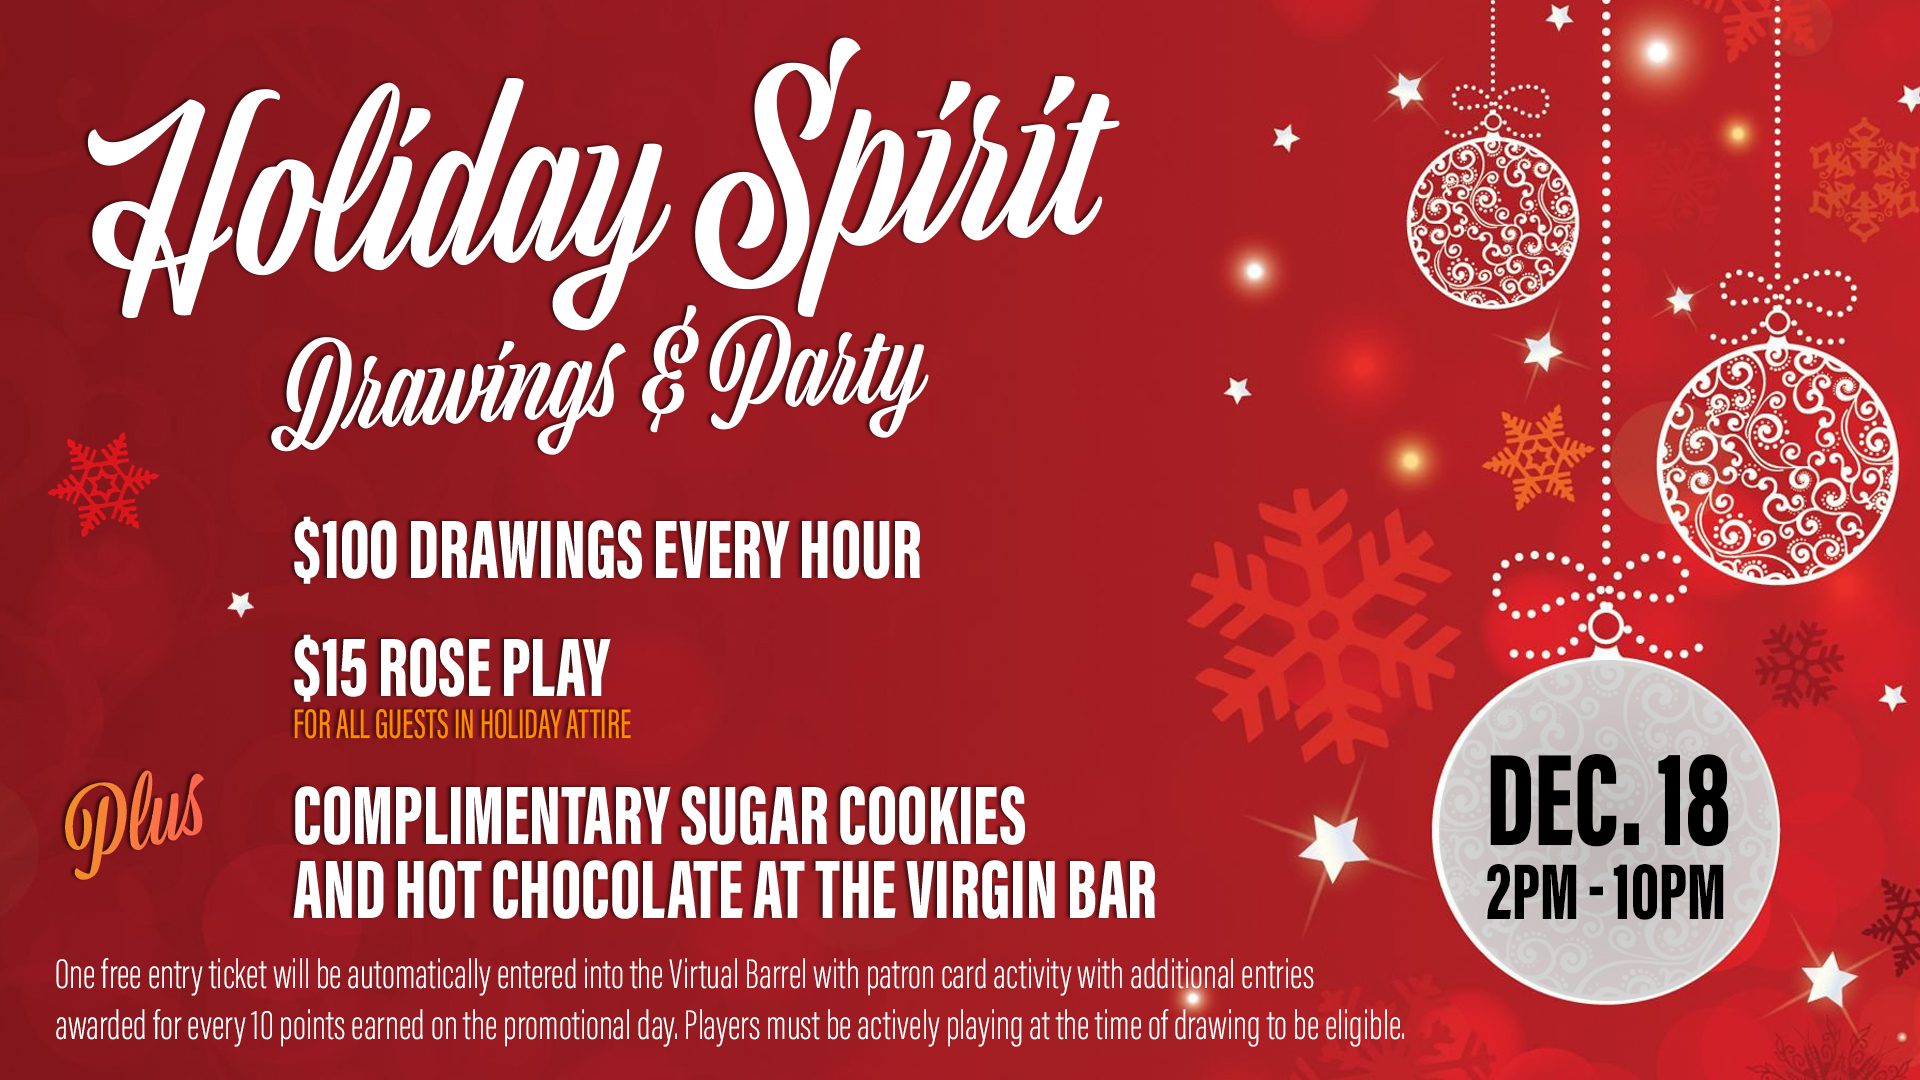 Holiday spirit drawings & party event advertisement with offerings listed: $15 rose play, complimentary sugar cookies, and hot chocolate at the virgin bar on december 18 from 2 pm - 10 pm.